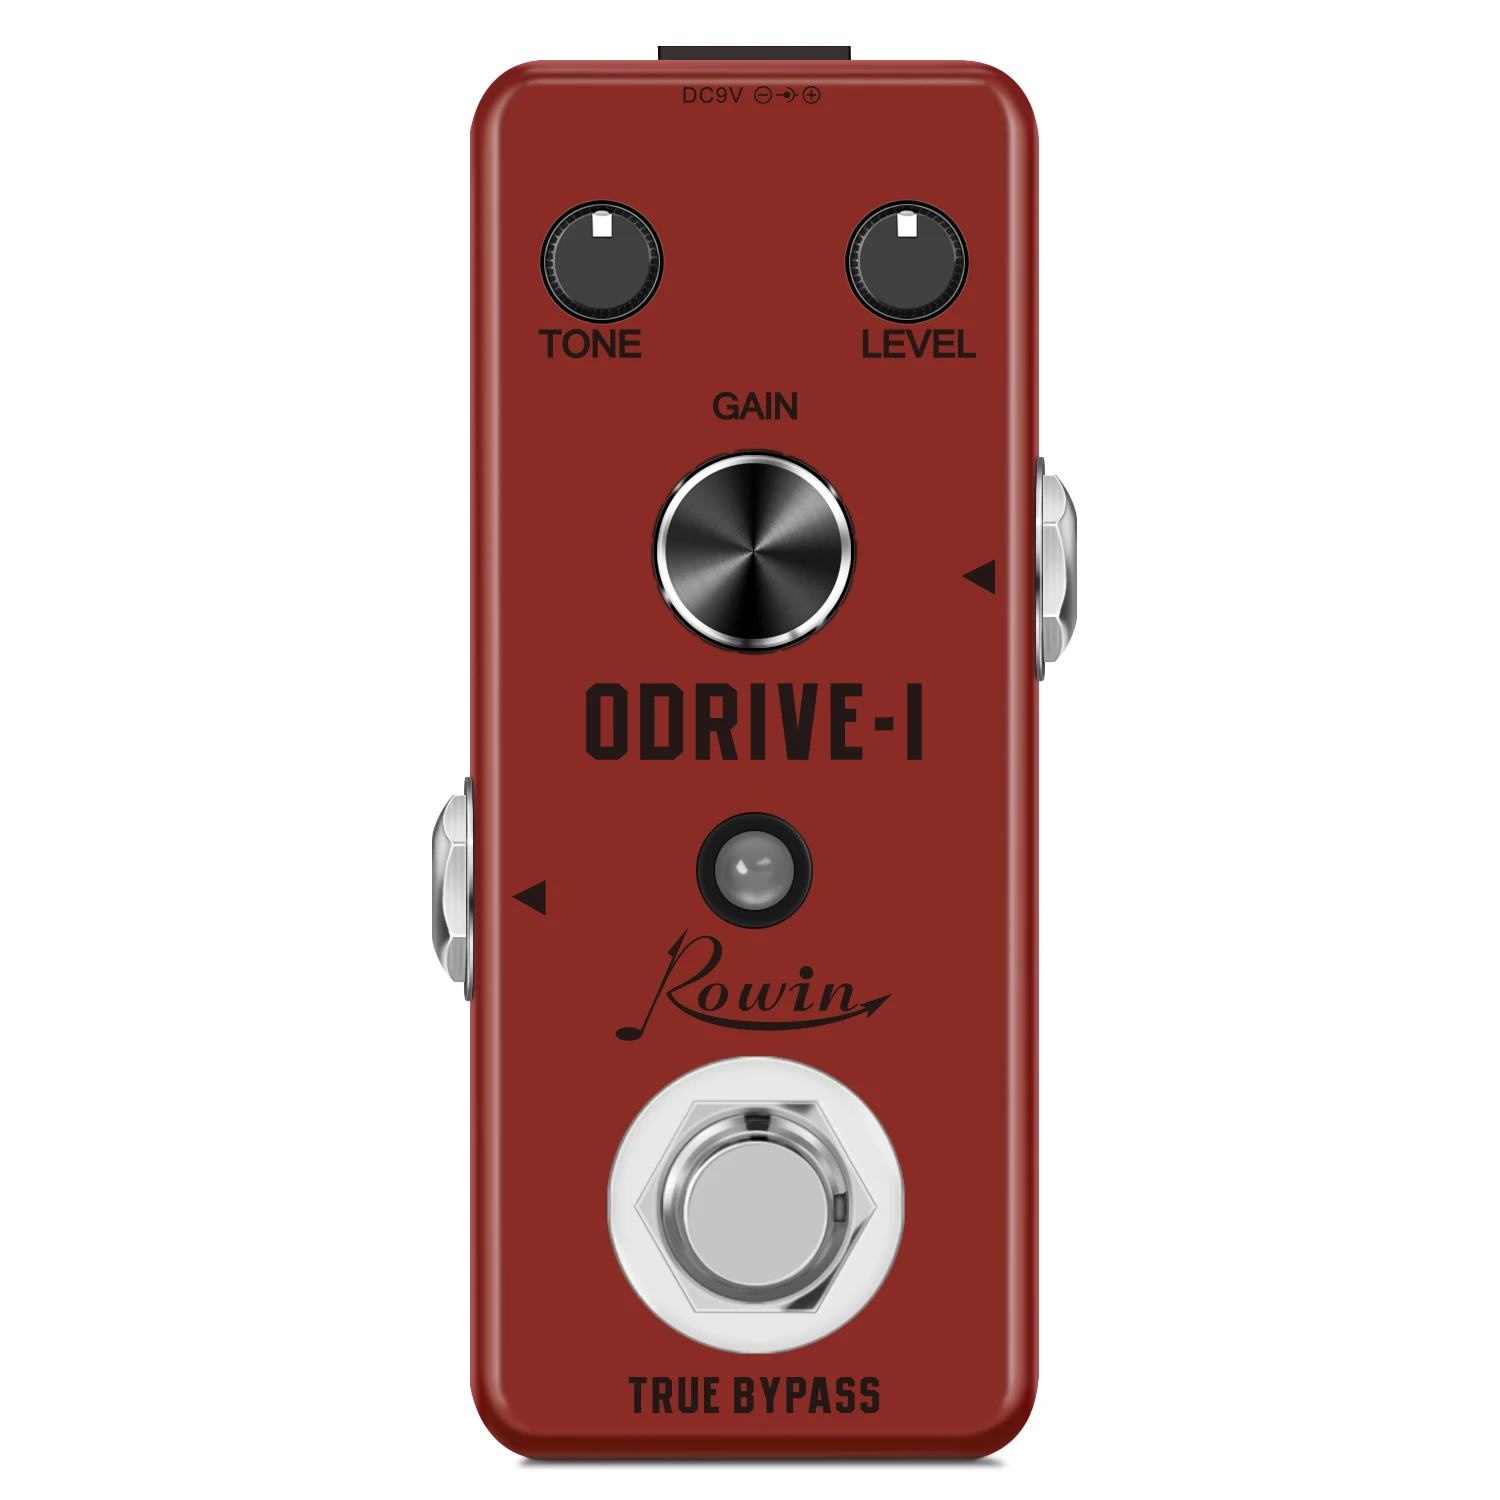 

Rowin Guitar Overdrive Pedal Analog Classic Blues Odrive-1 Effect Pedals Mini Size True Bypass LEF-302A